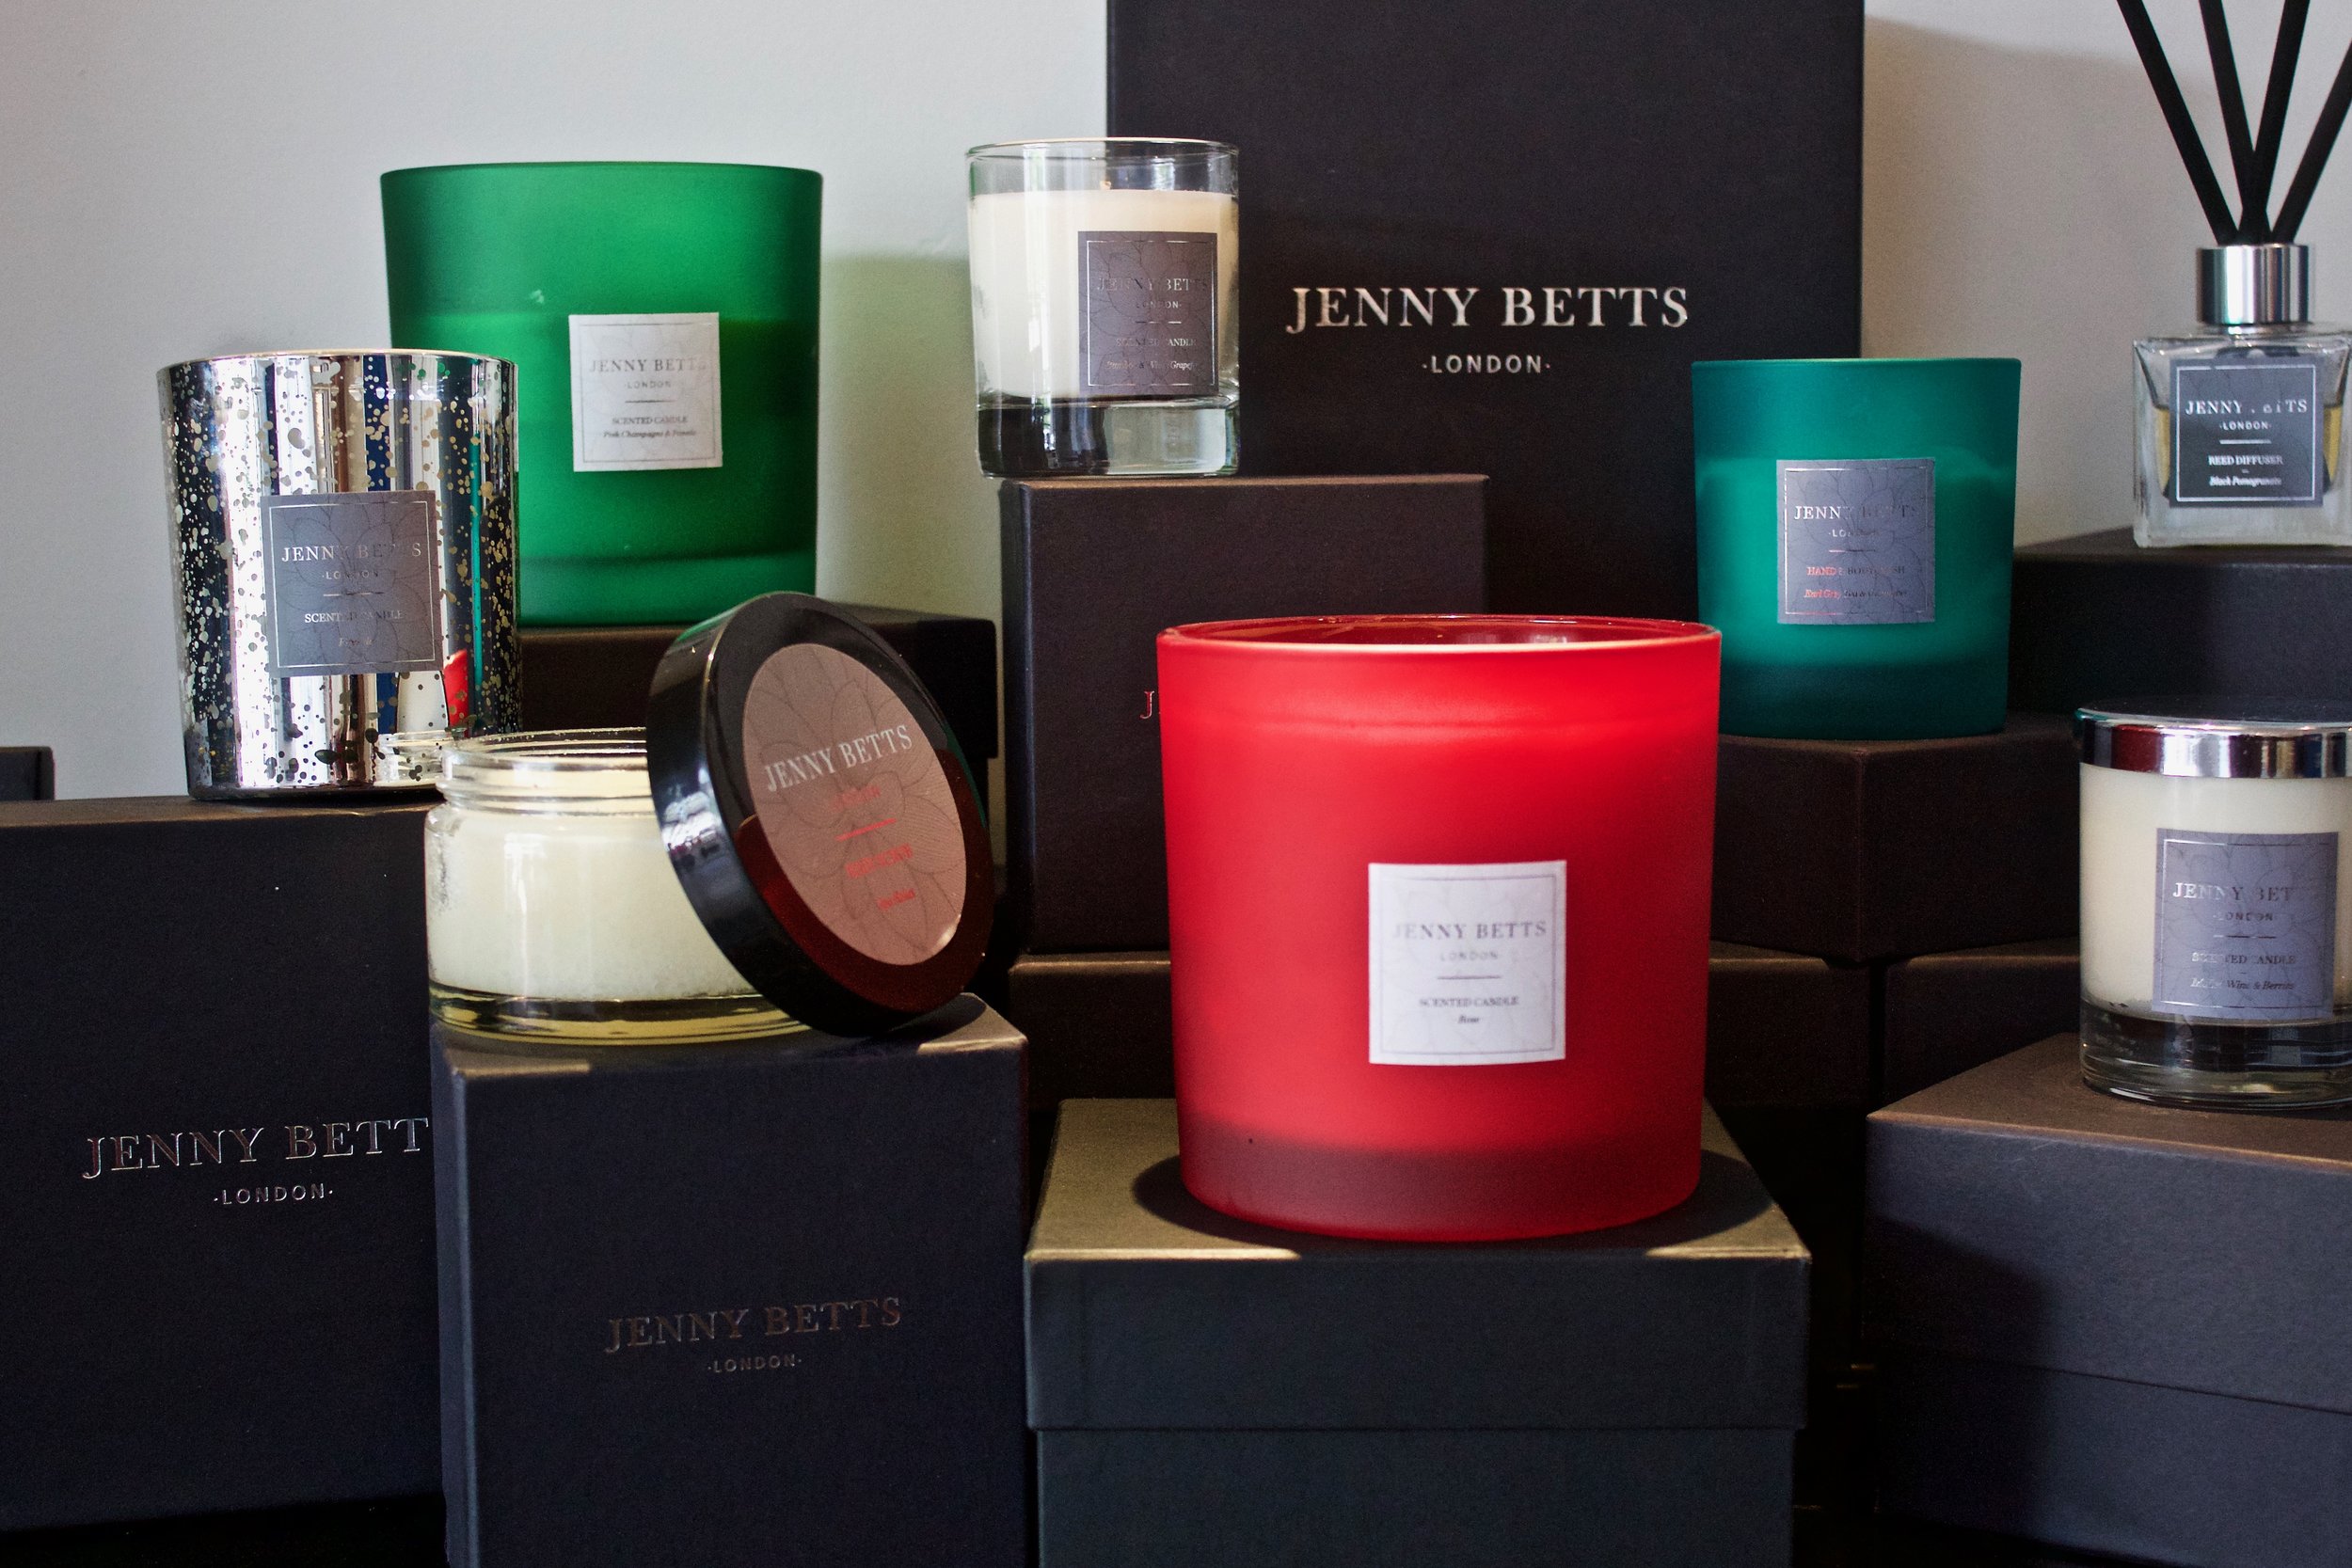 Jenny Betts London fragrances and candles in Battersea South West London 9.jpg